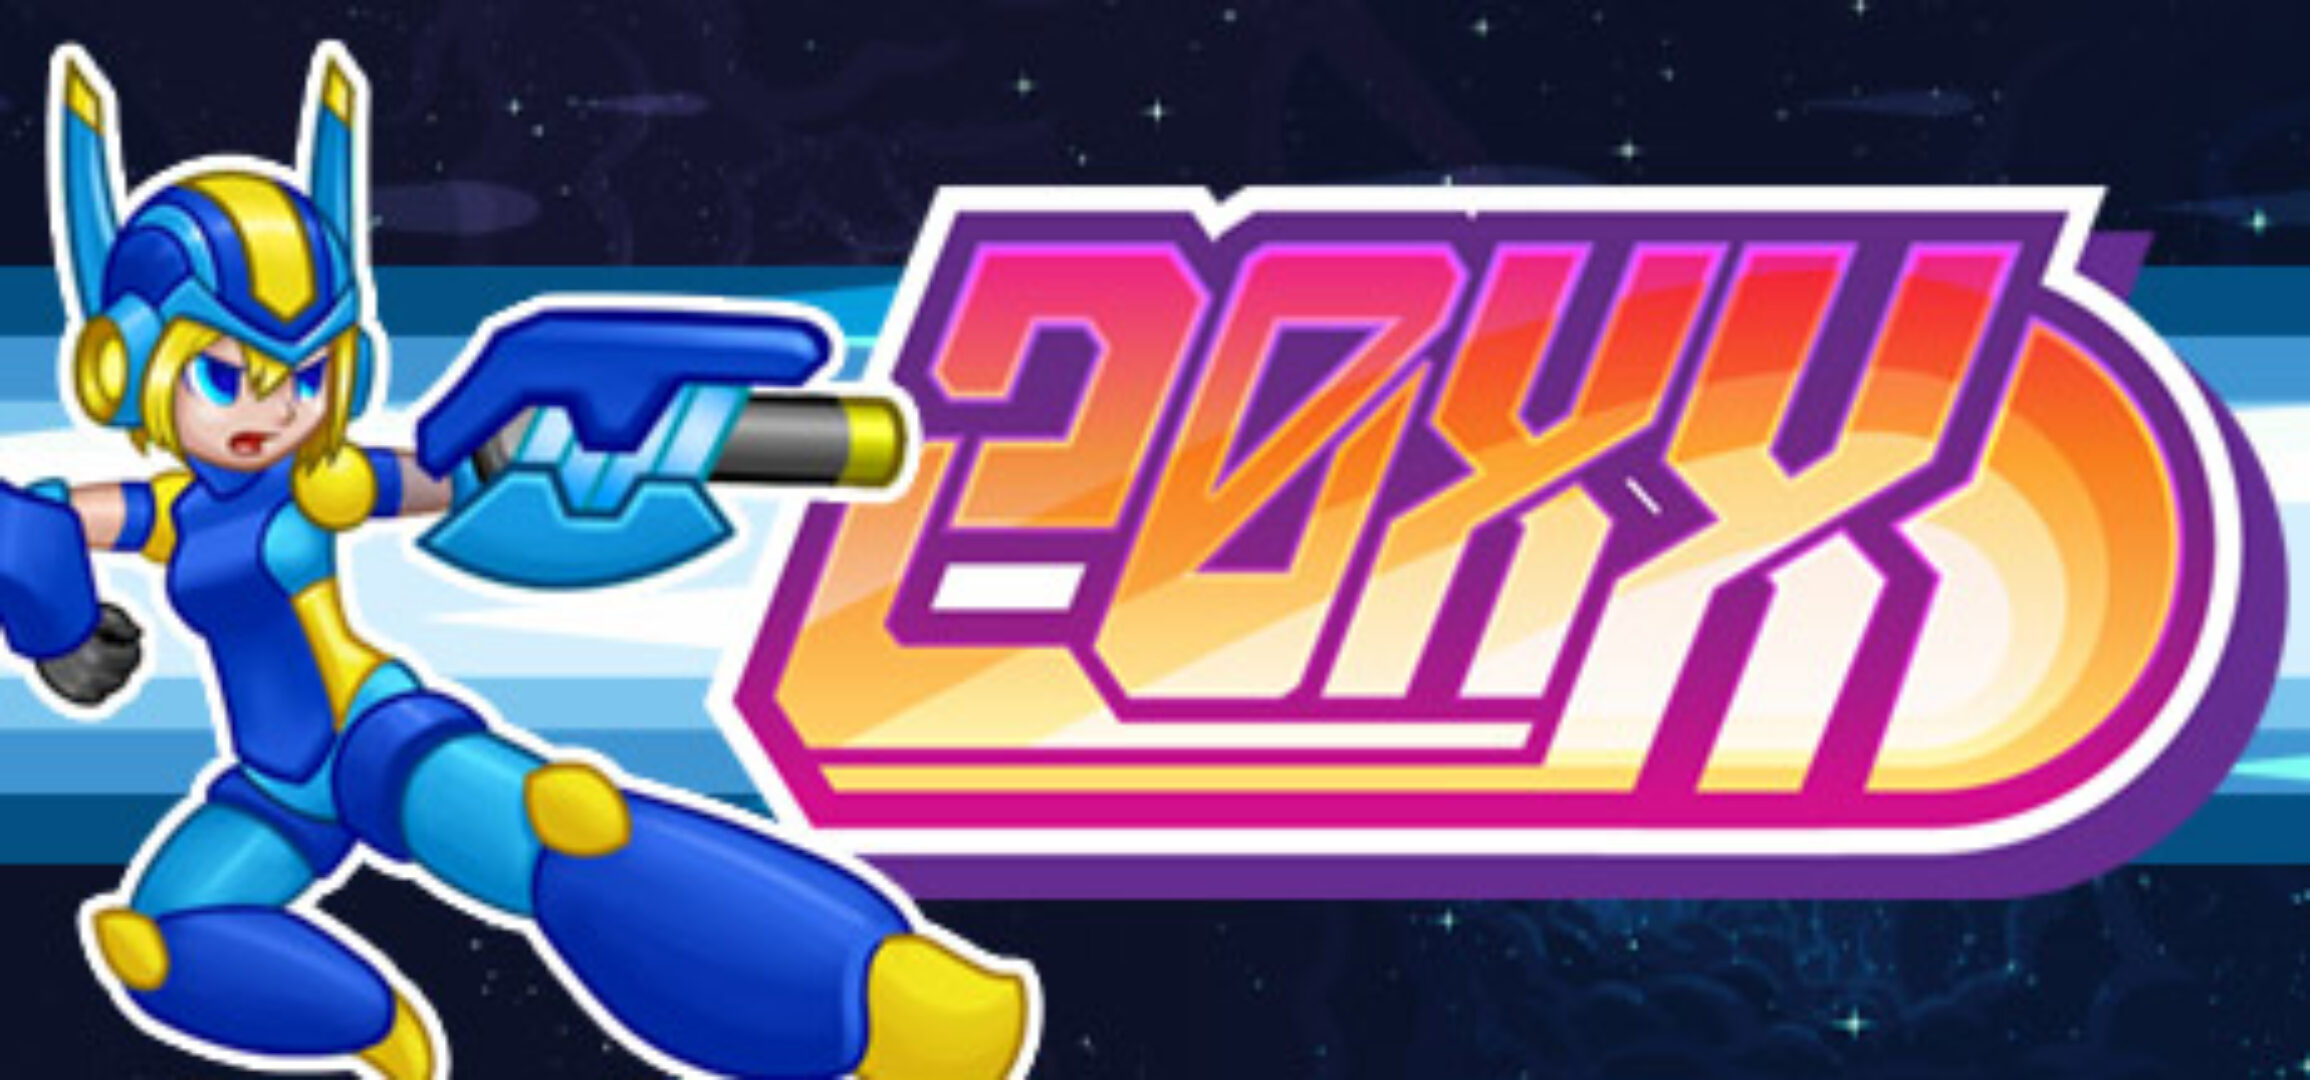 20XX Goes into Beta on Steam Early Access